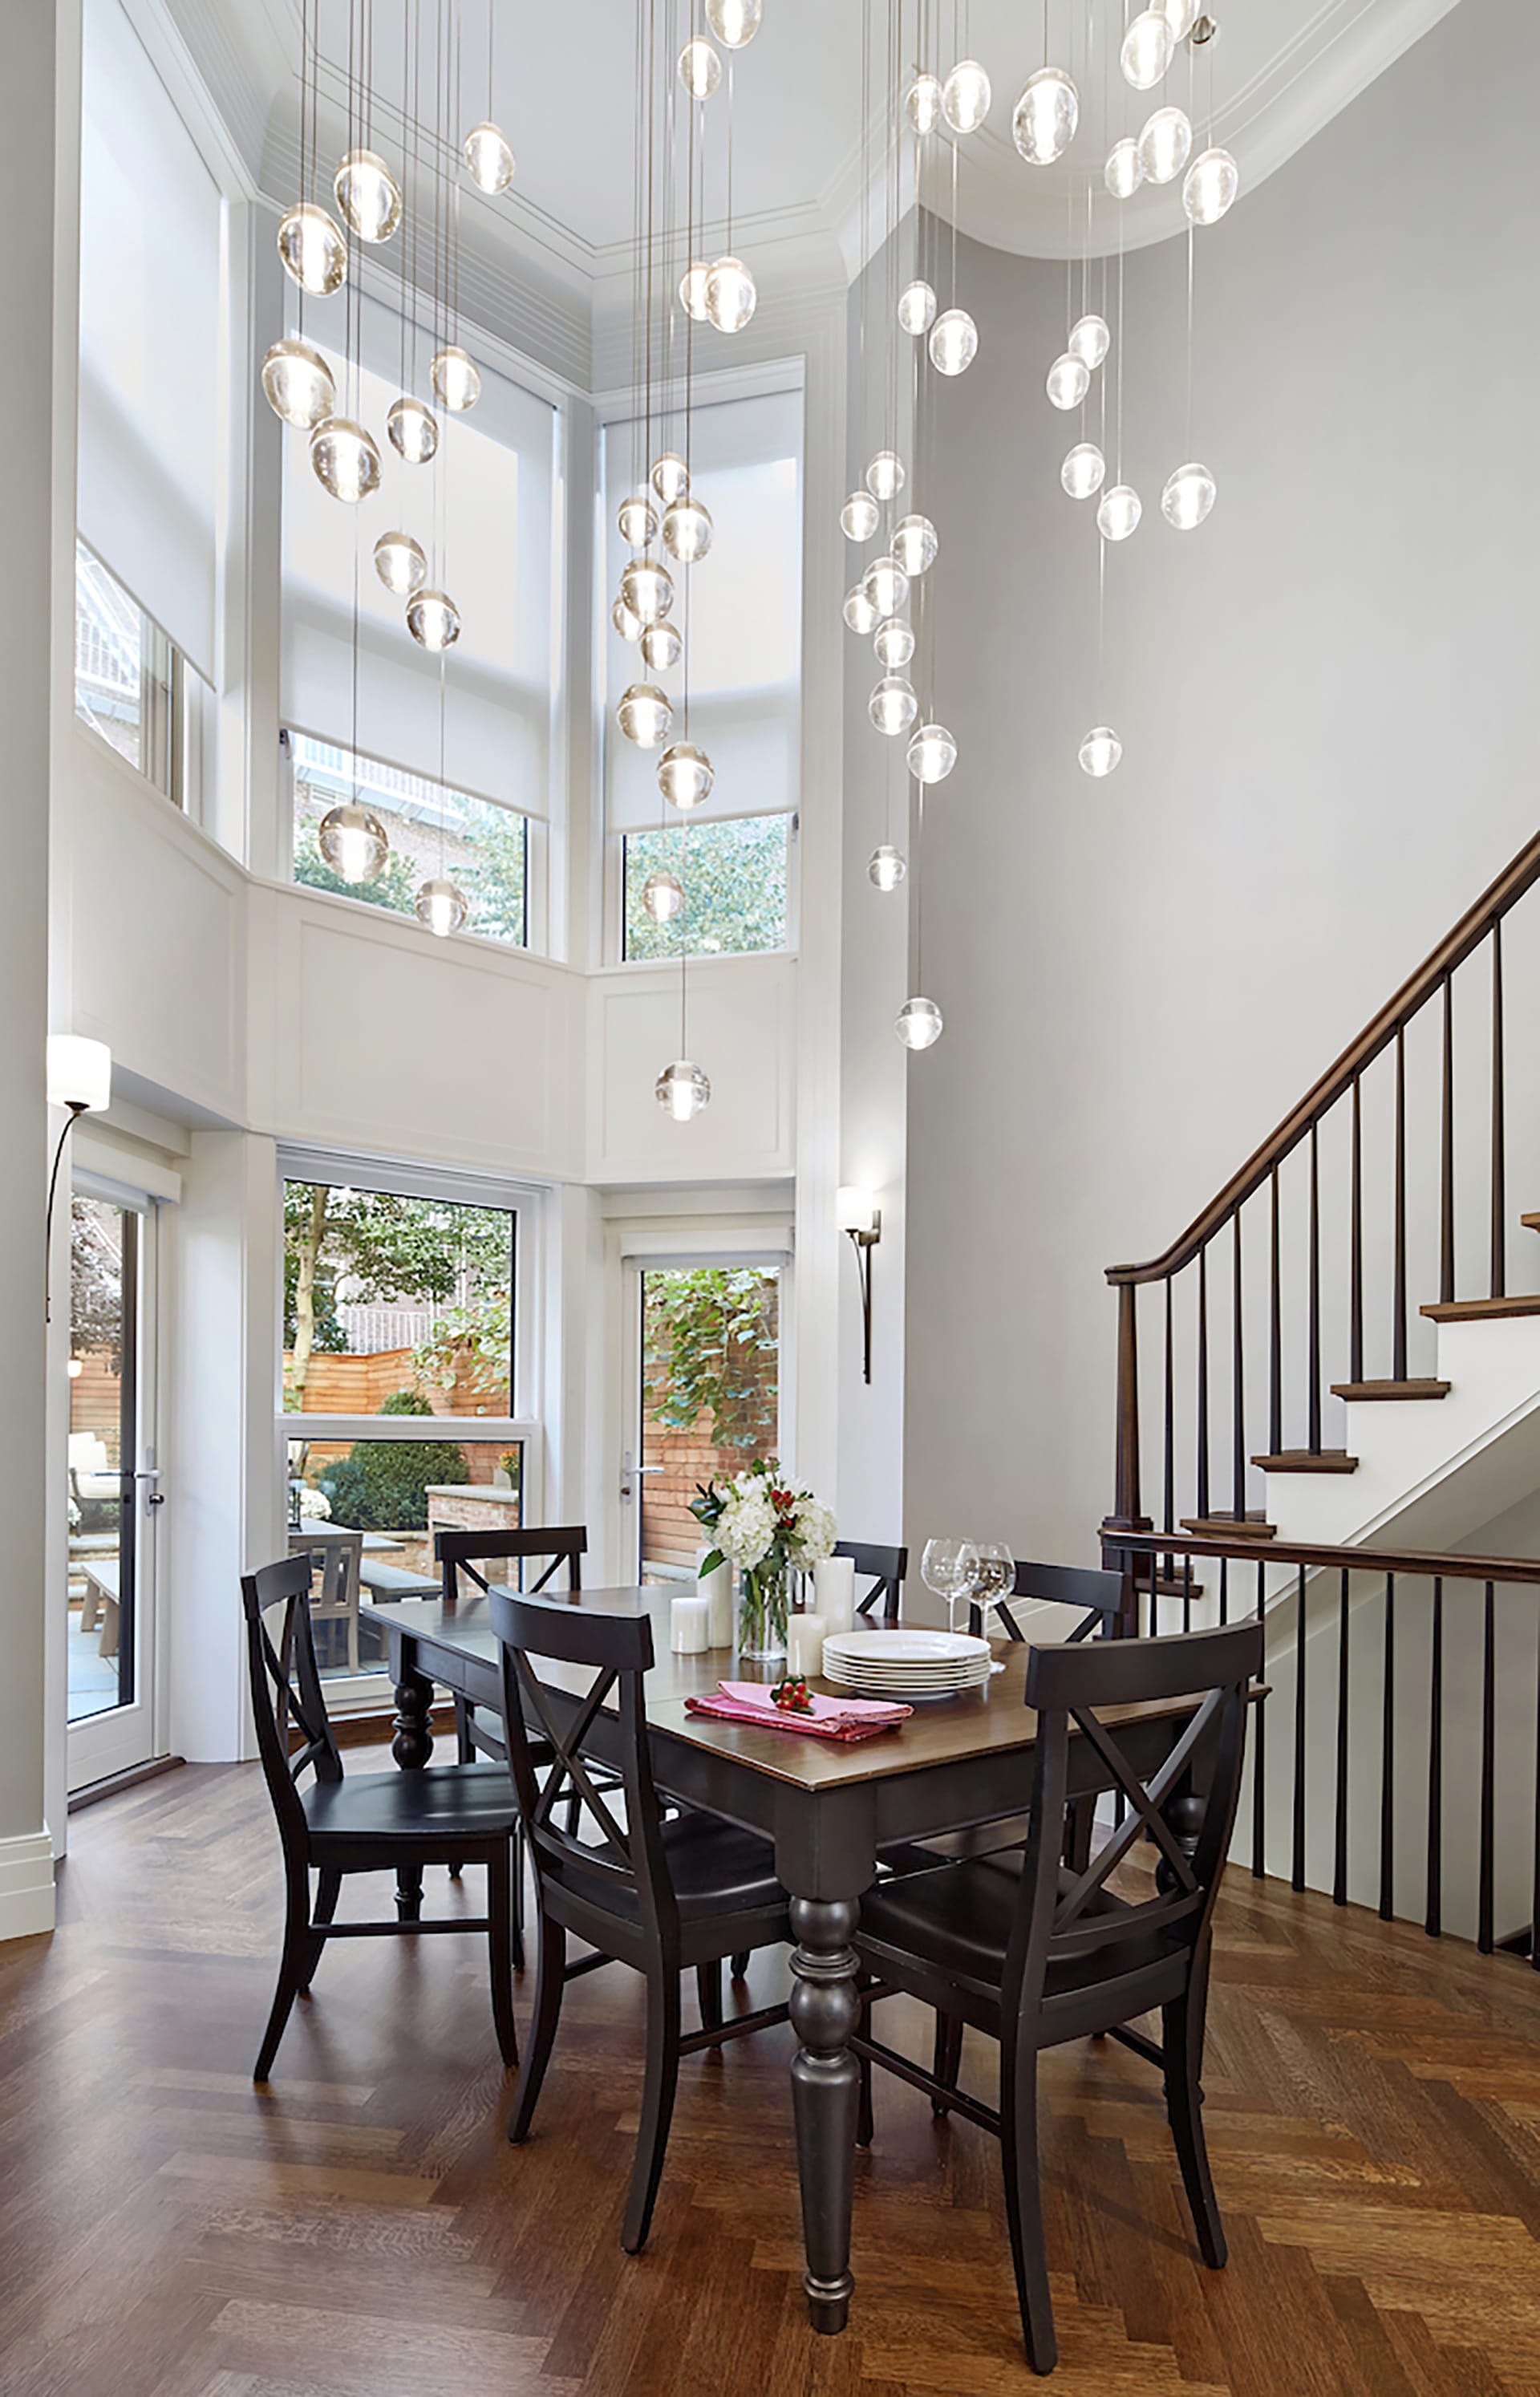 Dining area in a double height space with a two-story bay window and a hanging Bocce light fixture installation